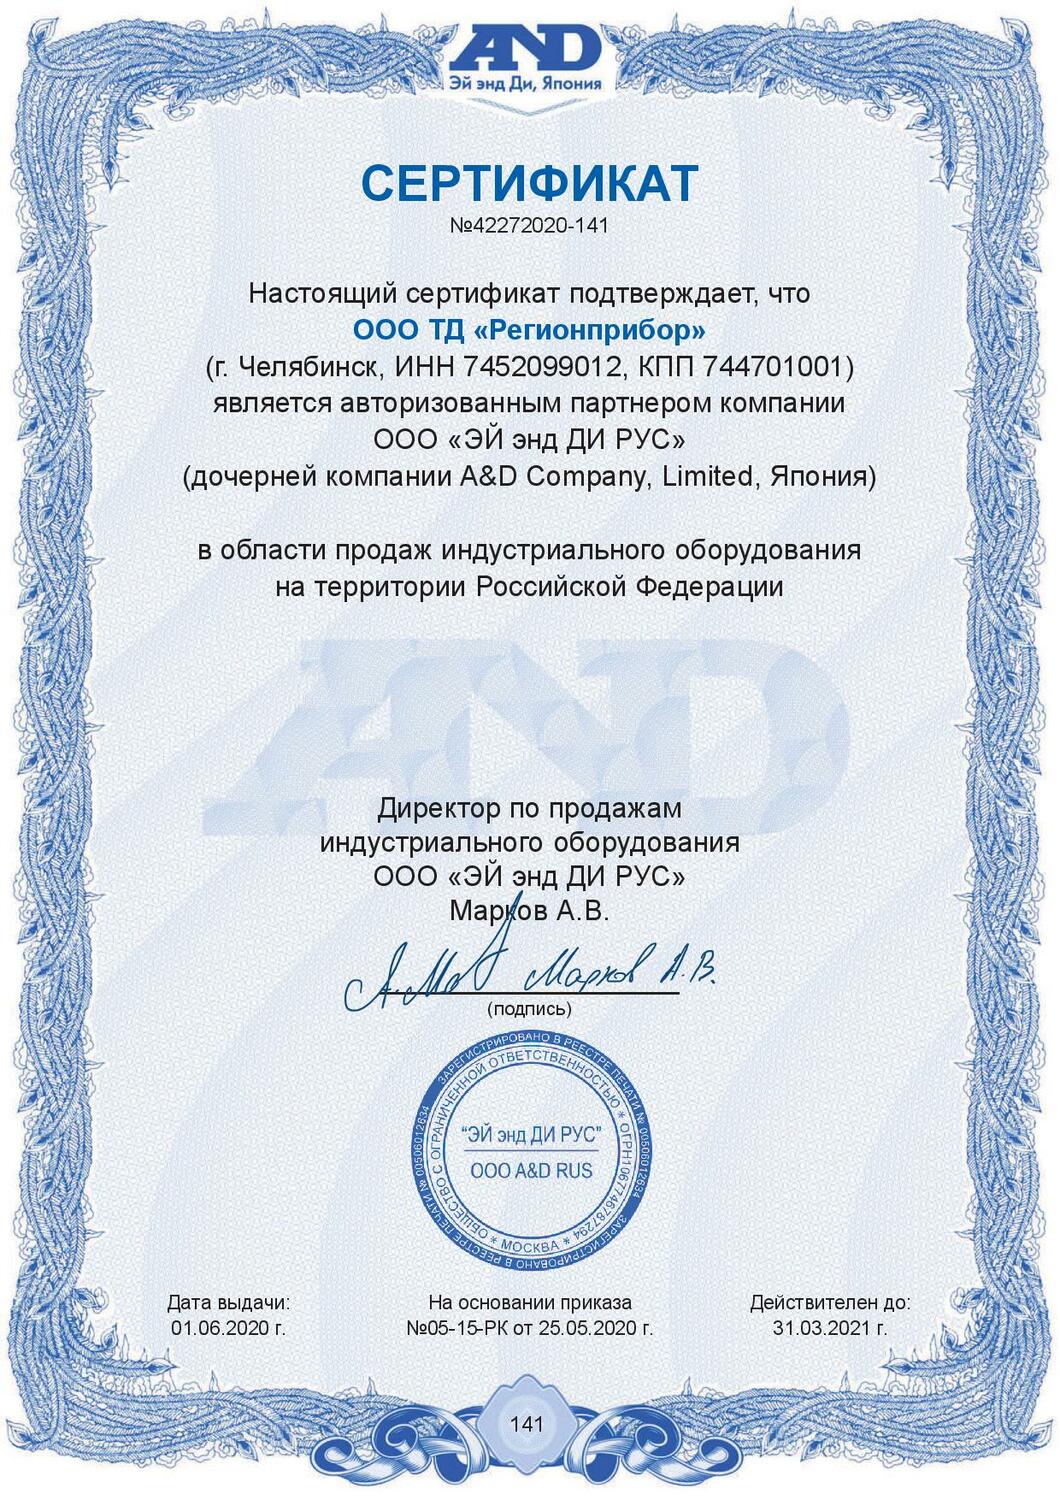 <span style="font-weight: bold;">A&amp;D Company, Япония</span>